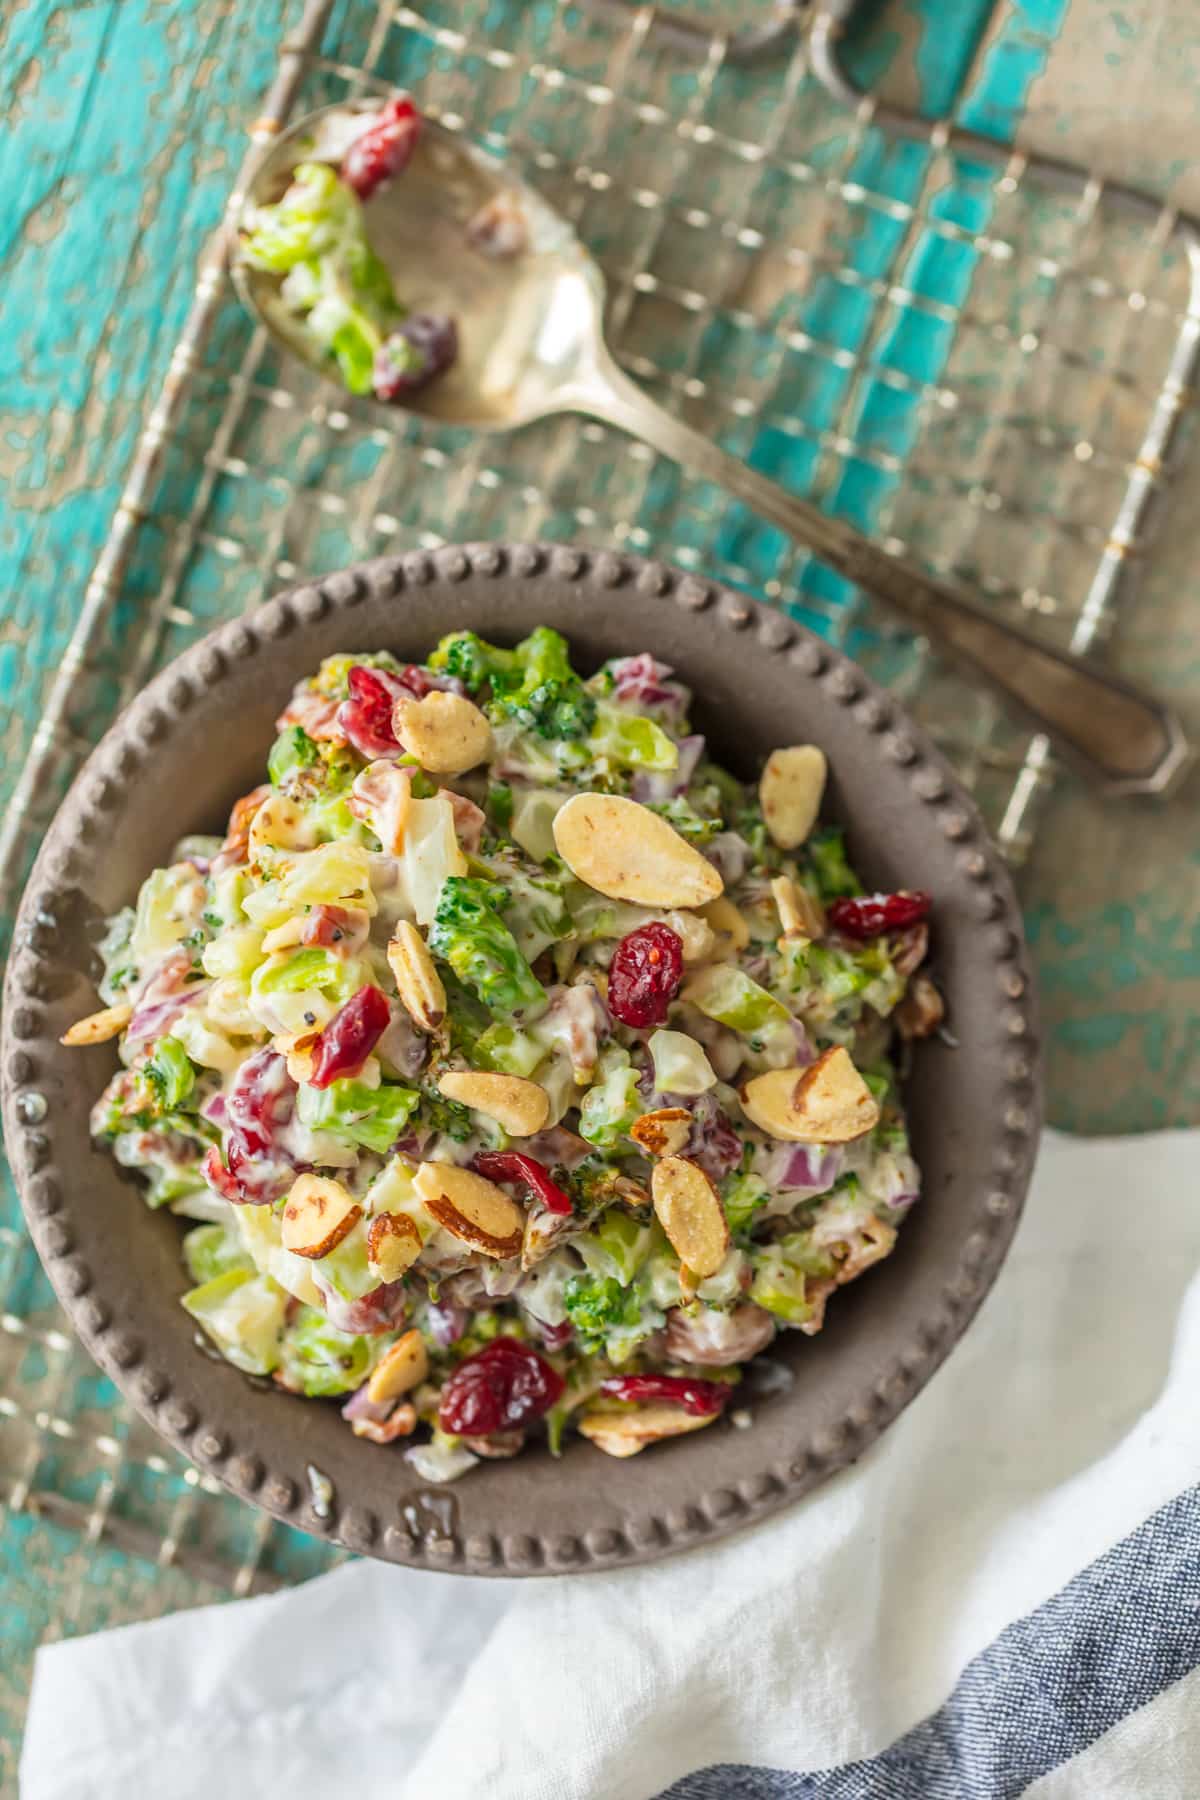 Broccoli Salad recipe with almonds, cranberries, and bacon